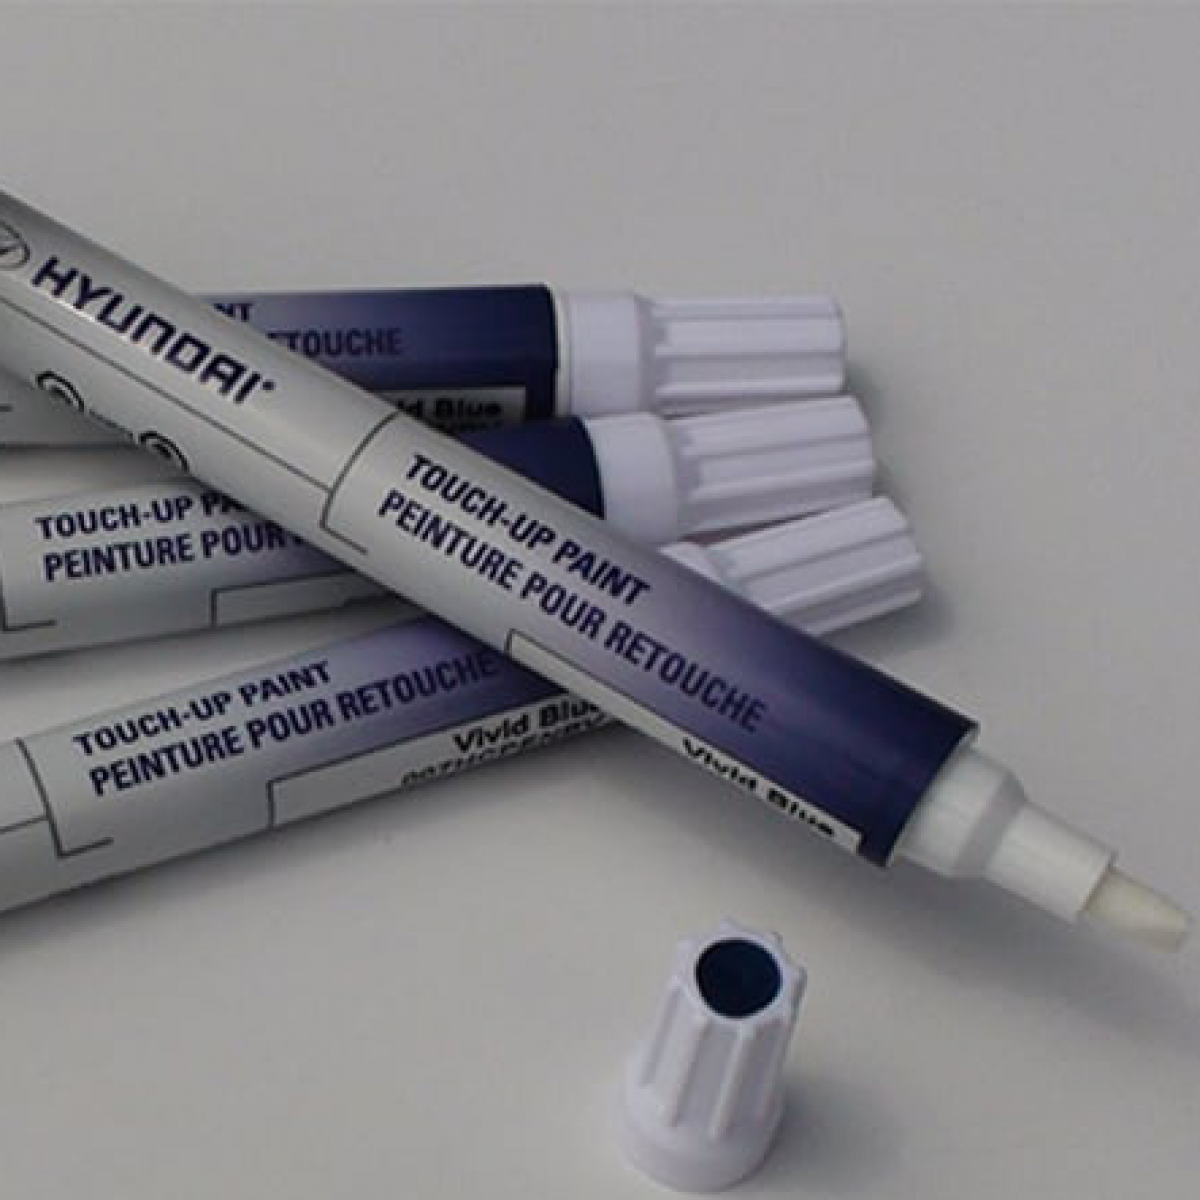 Hyundai Touch-Up Paint Pens - Magnetic Grey 000HC-PNM2F